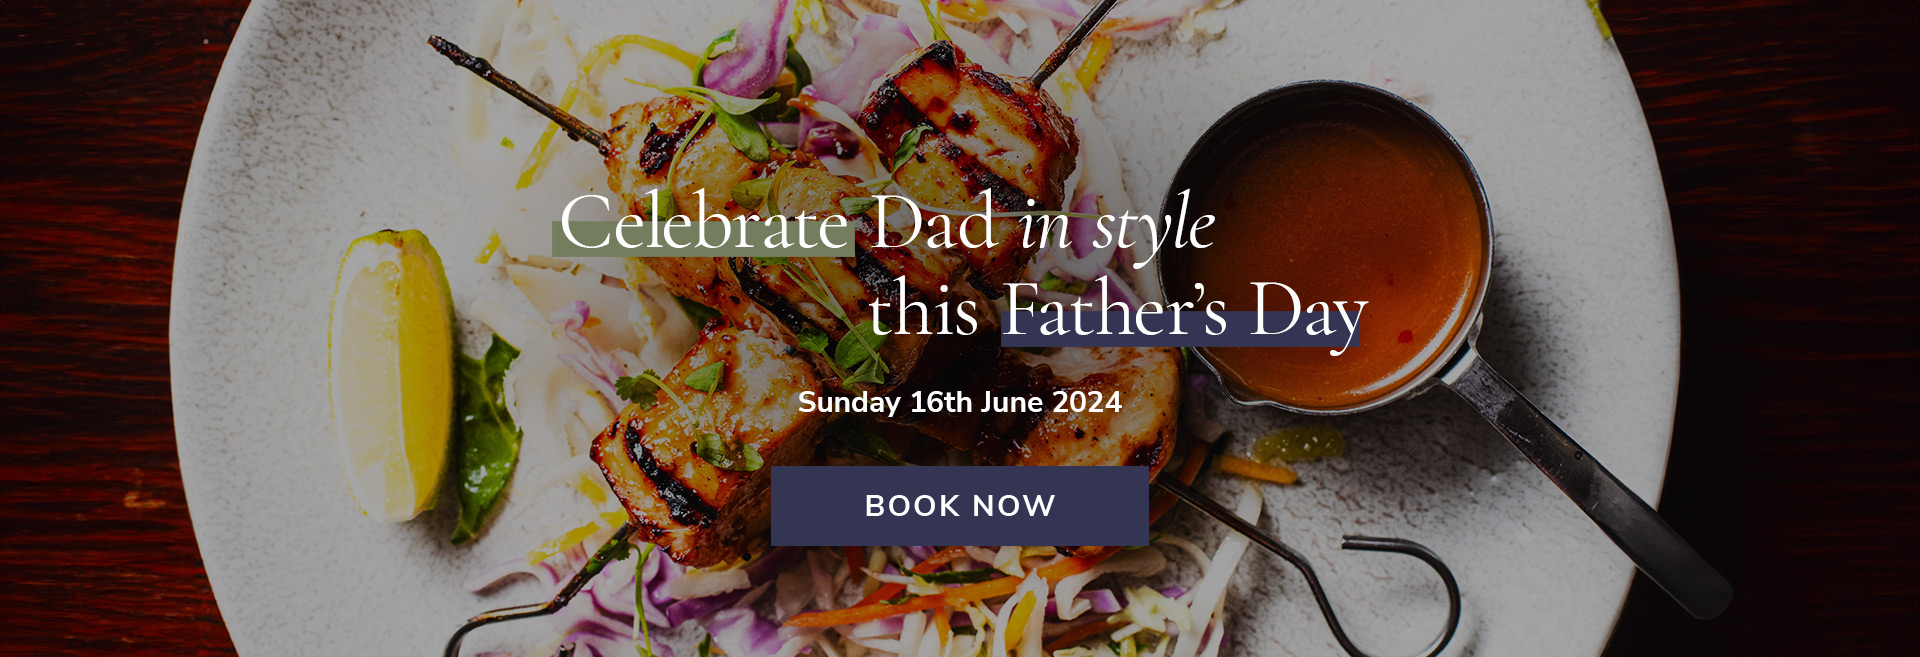 Father's Day at The Sun Inn